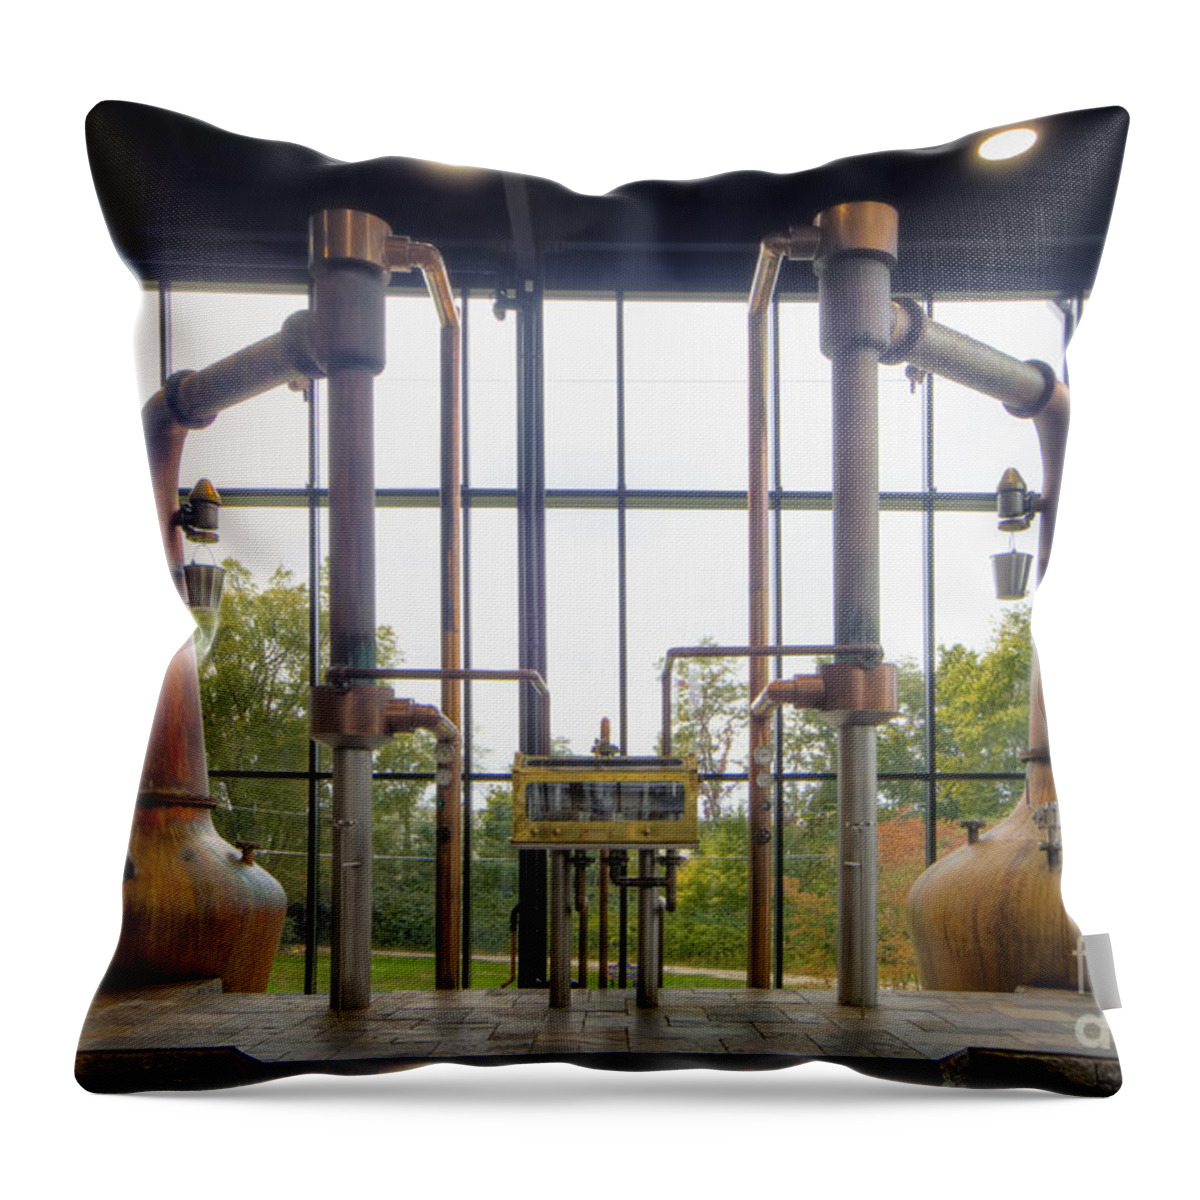 Town Throw Pillow featuring the photograph Town Branch - D008627 by Daniel Dempster